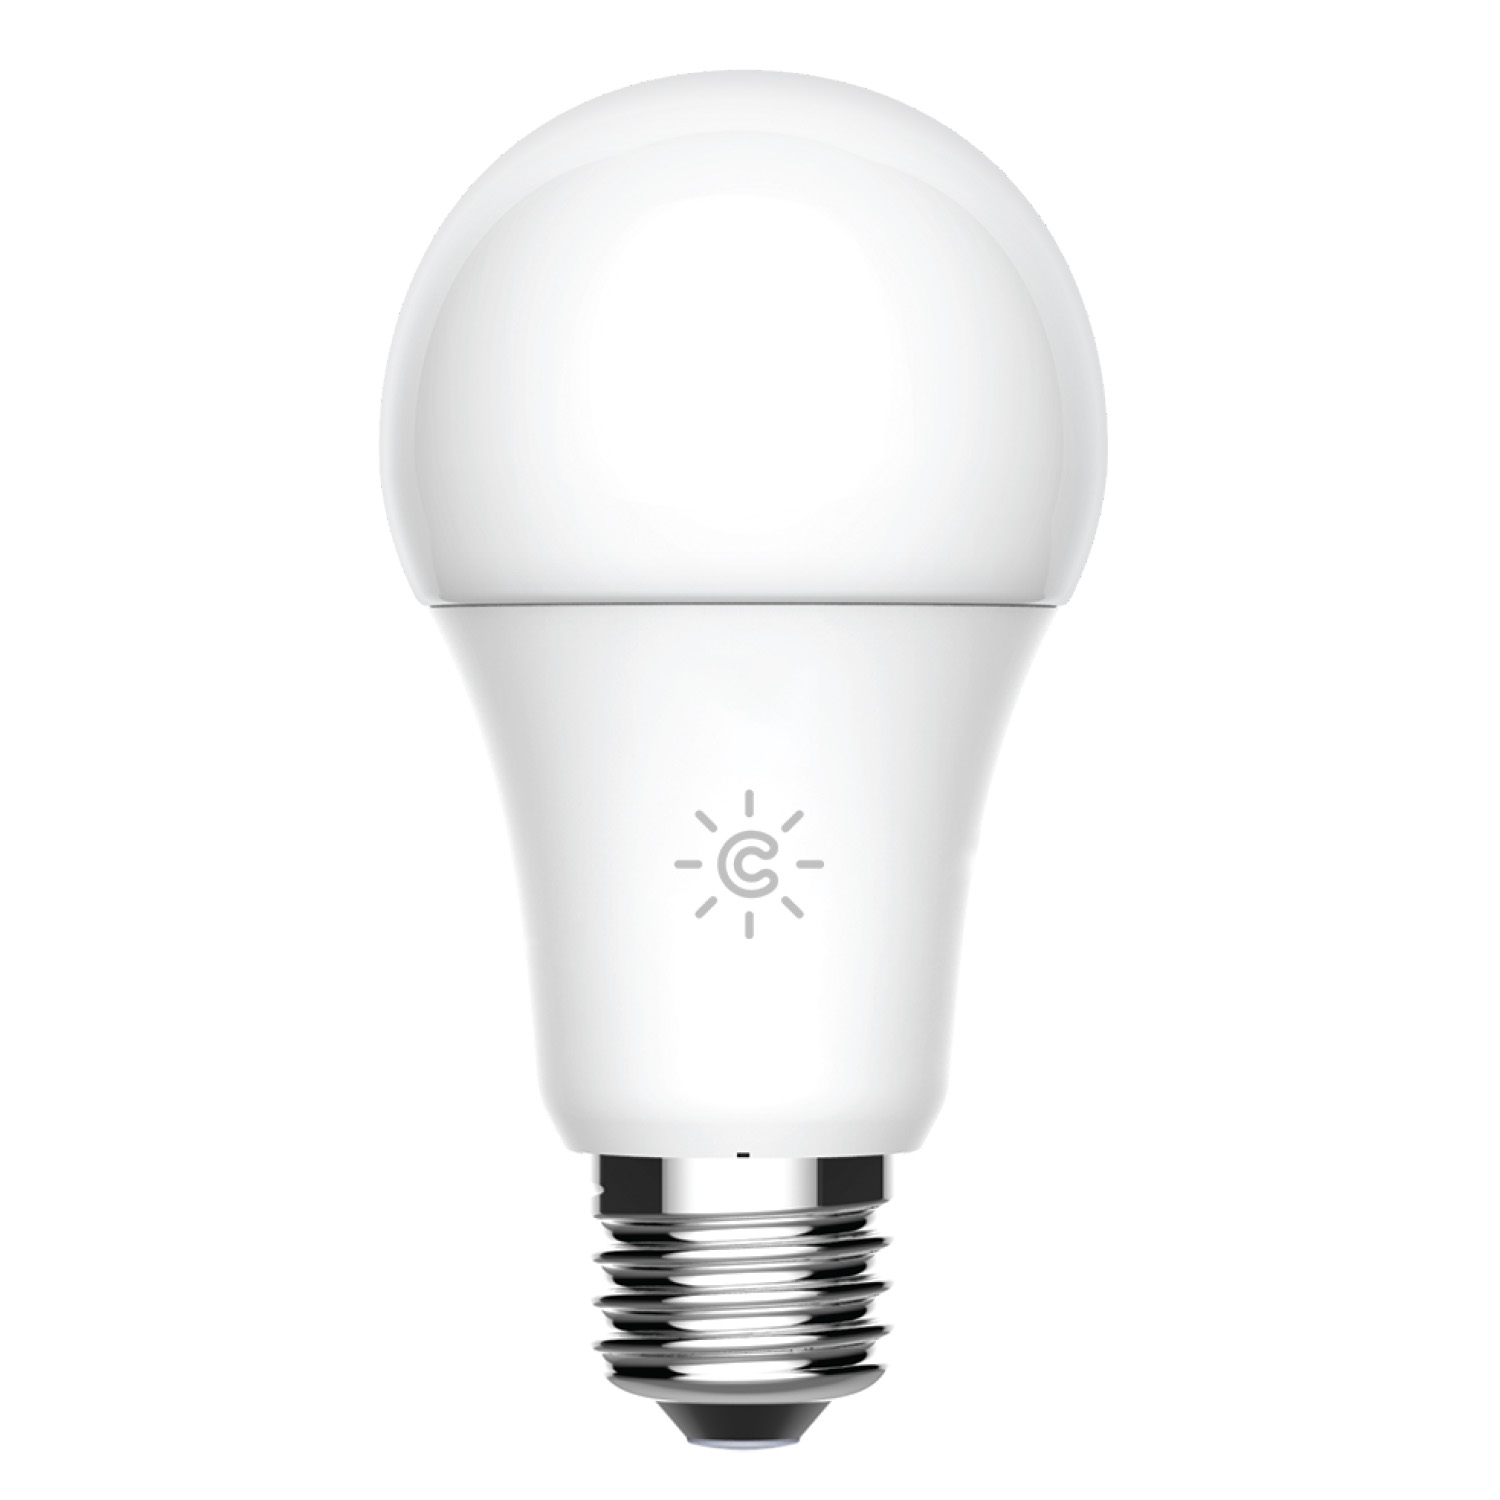 GE CYNC Smart Light Bulb, Full Color, App and Voice Control, Works with Google, 1pk - image 3 of 7